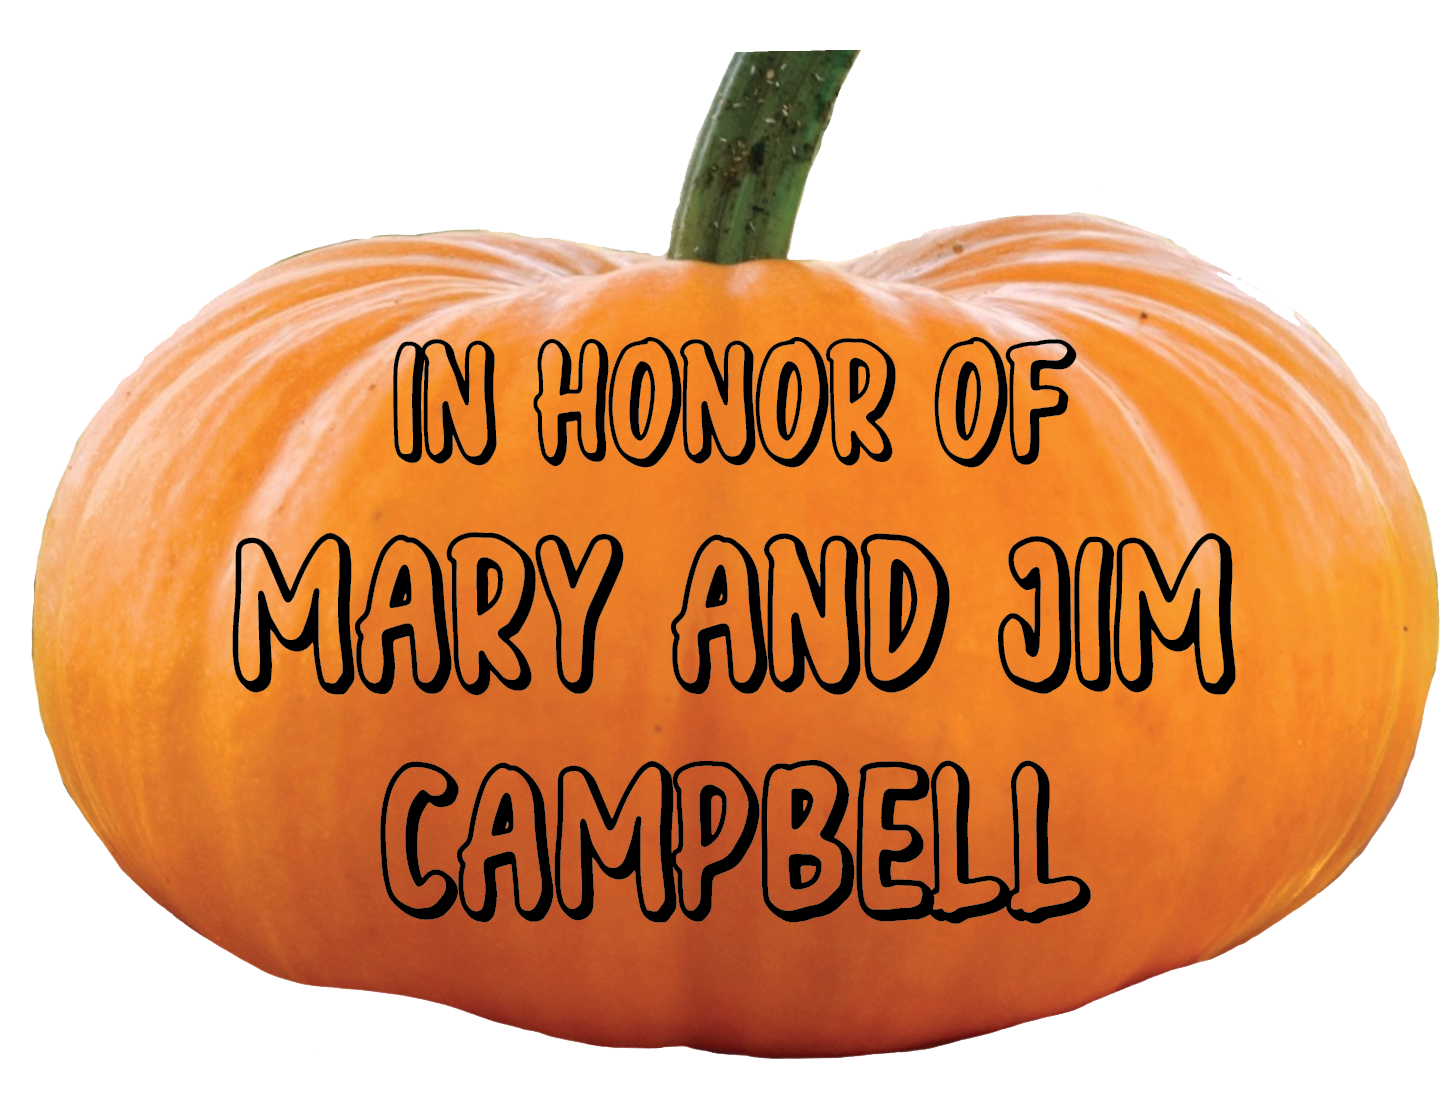 Thank you, Jimmy Campbell, for your donation.